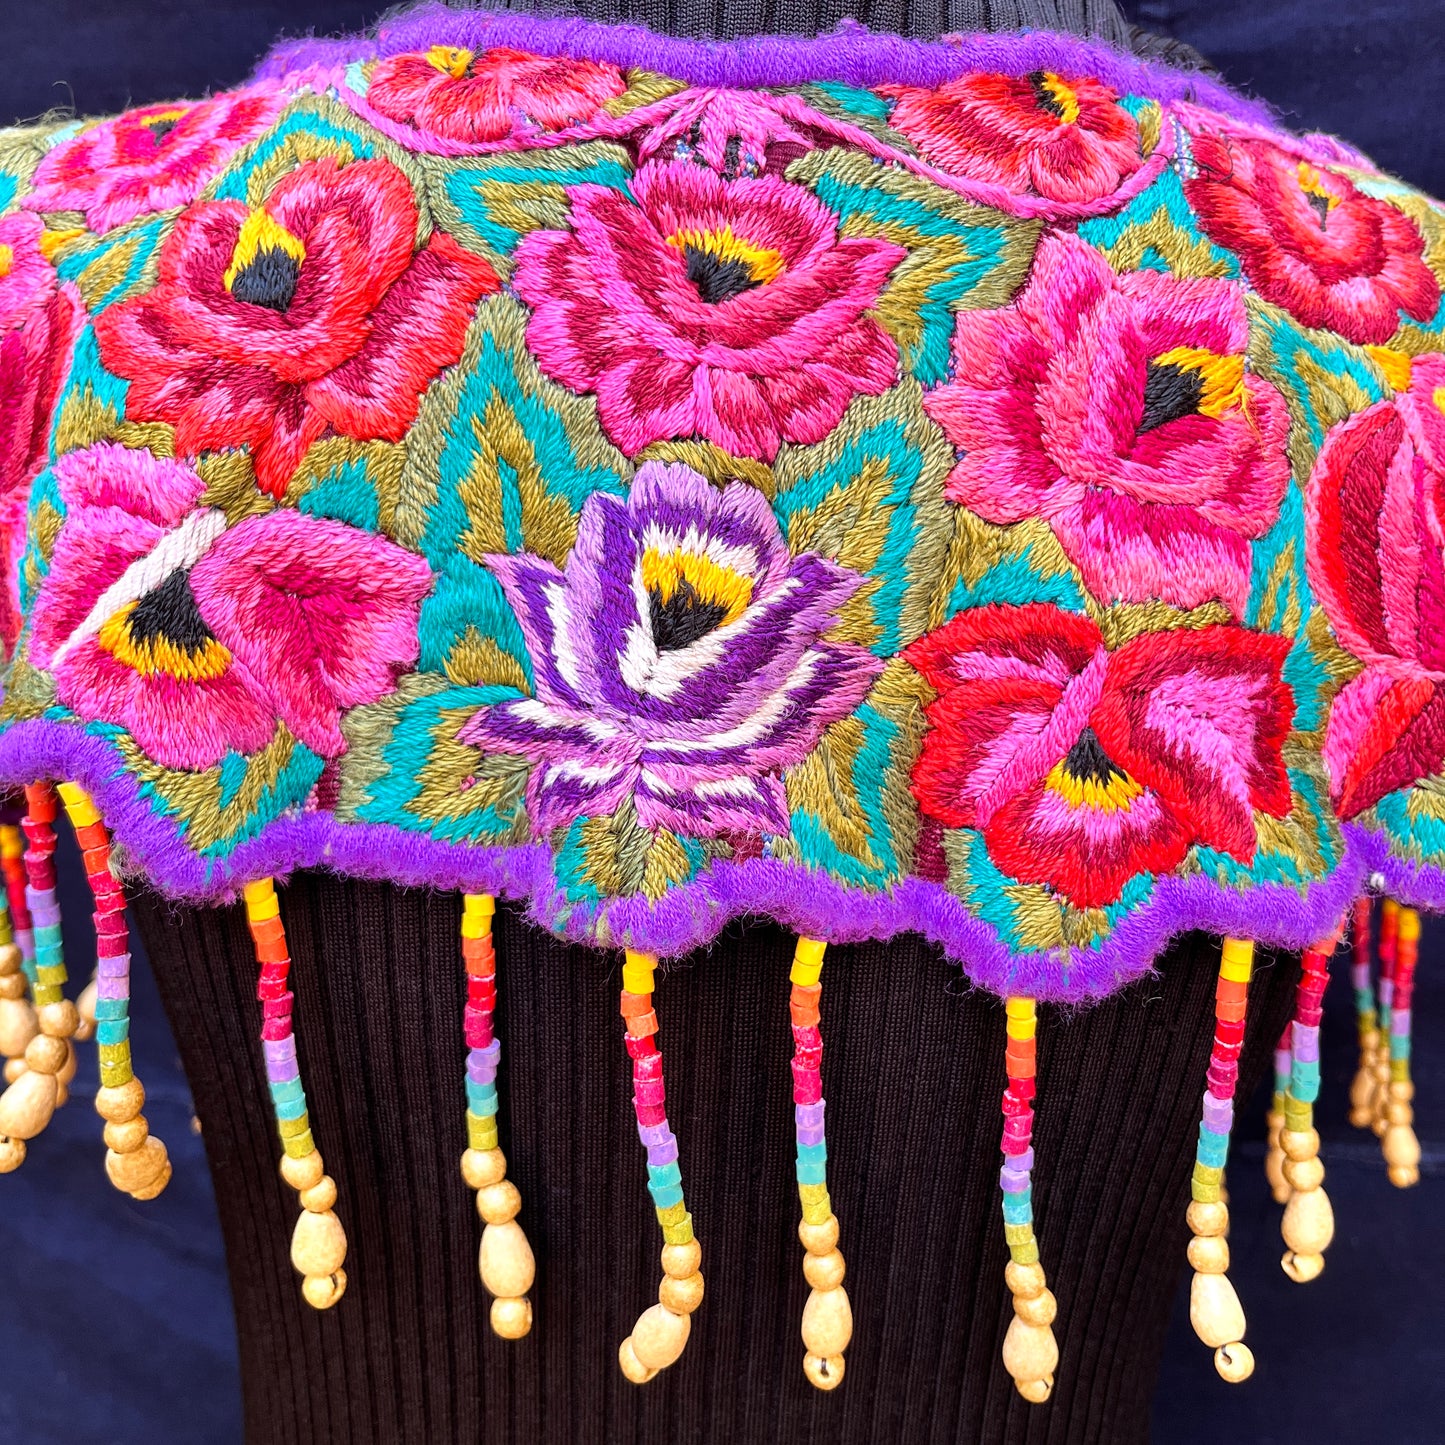 Textile Cape with Beaded Body Chains - "Huipil Capa", fierce vibrant